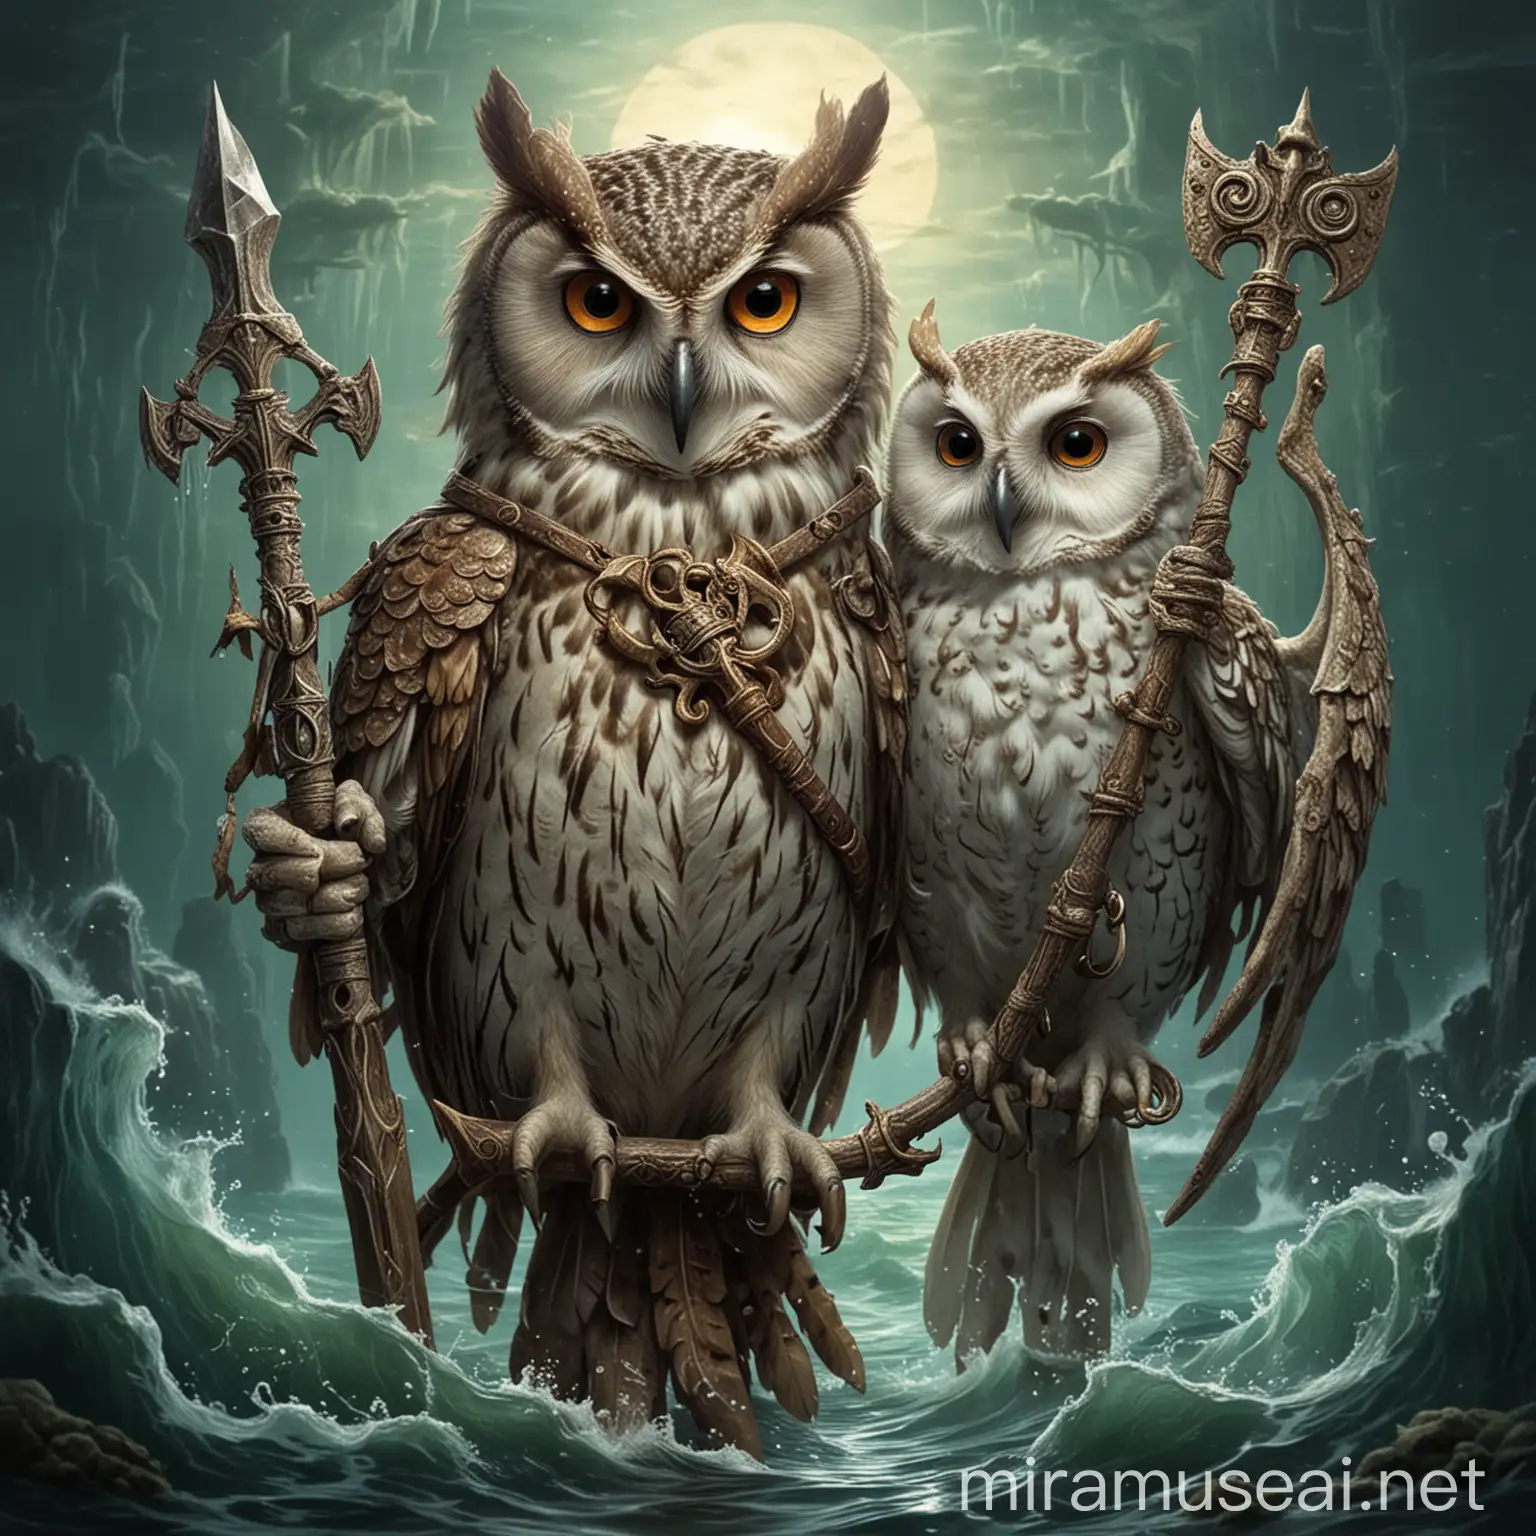 Owl and seahorse holding trident